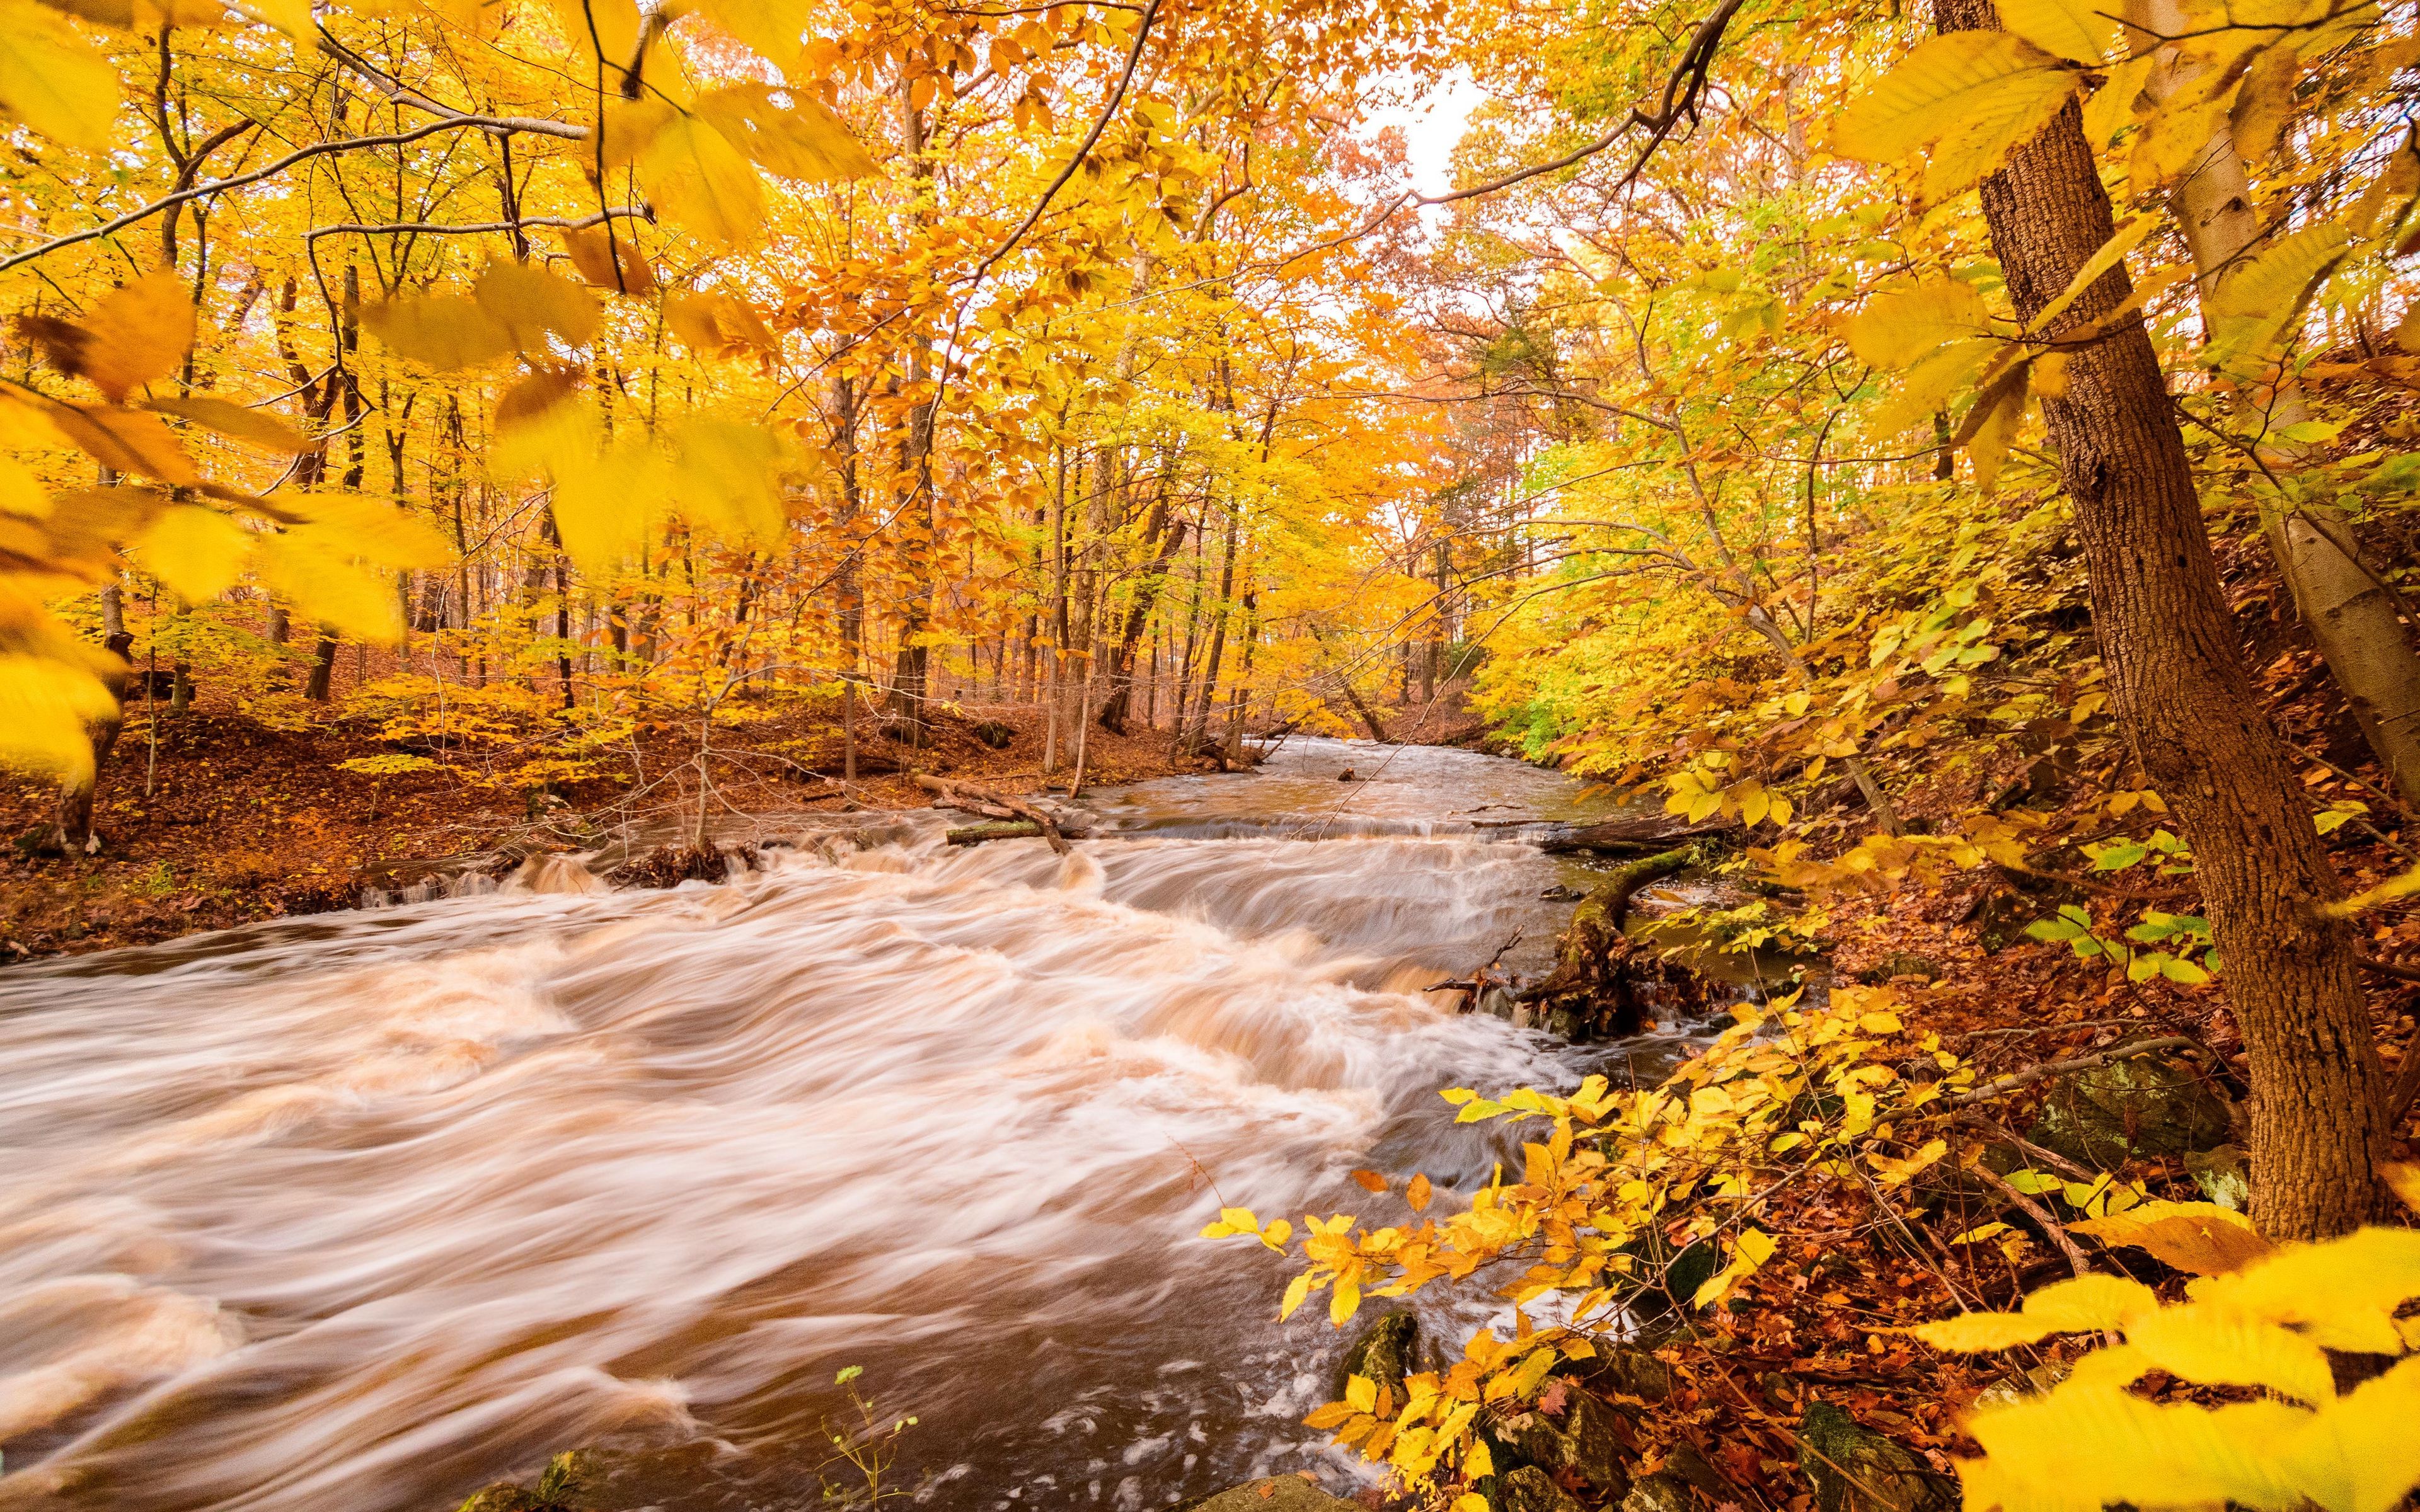 Download wallpaper 3840x2400 river, forest, autumn, trees, yellow 4k ultra HD 16:10 HD background